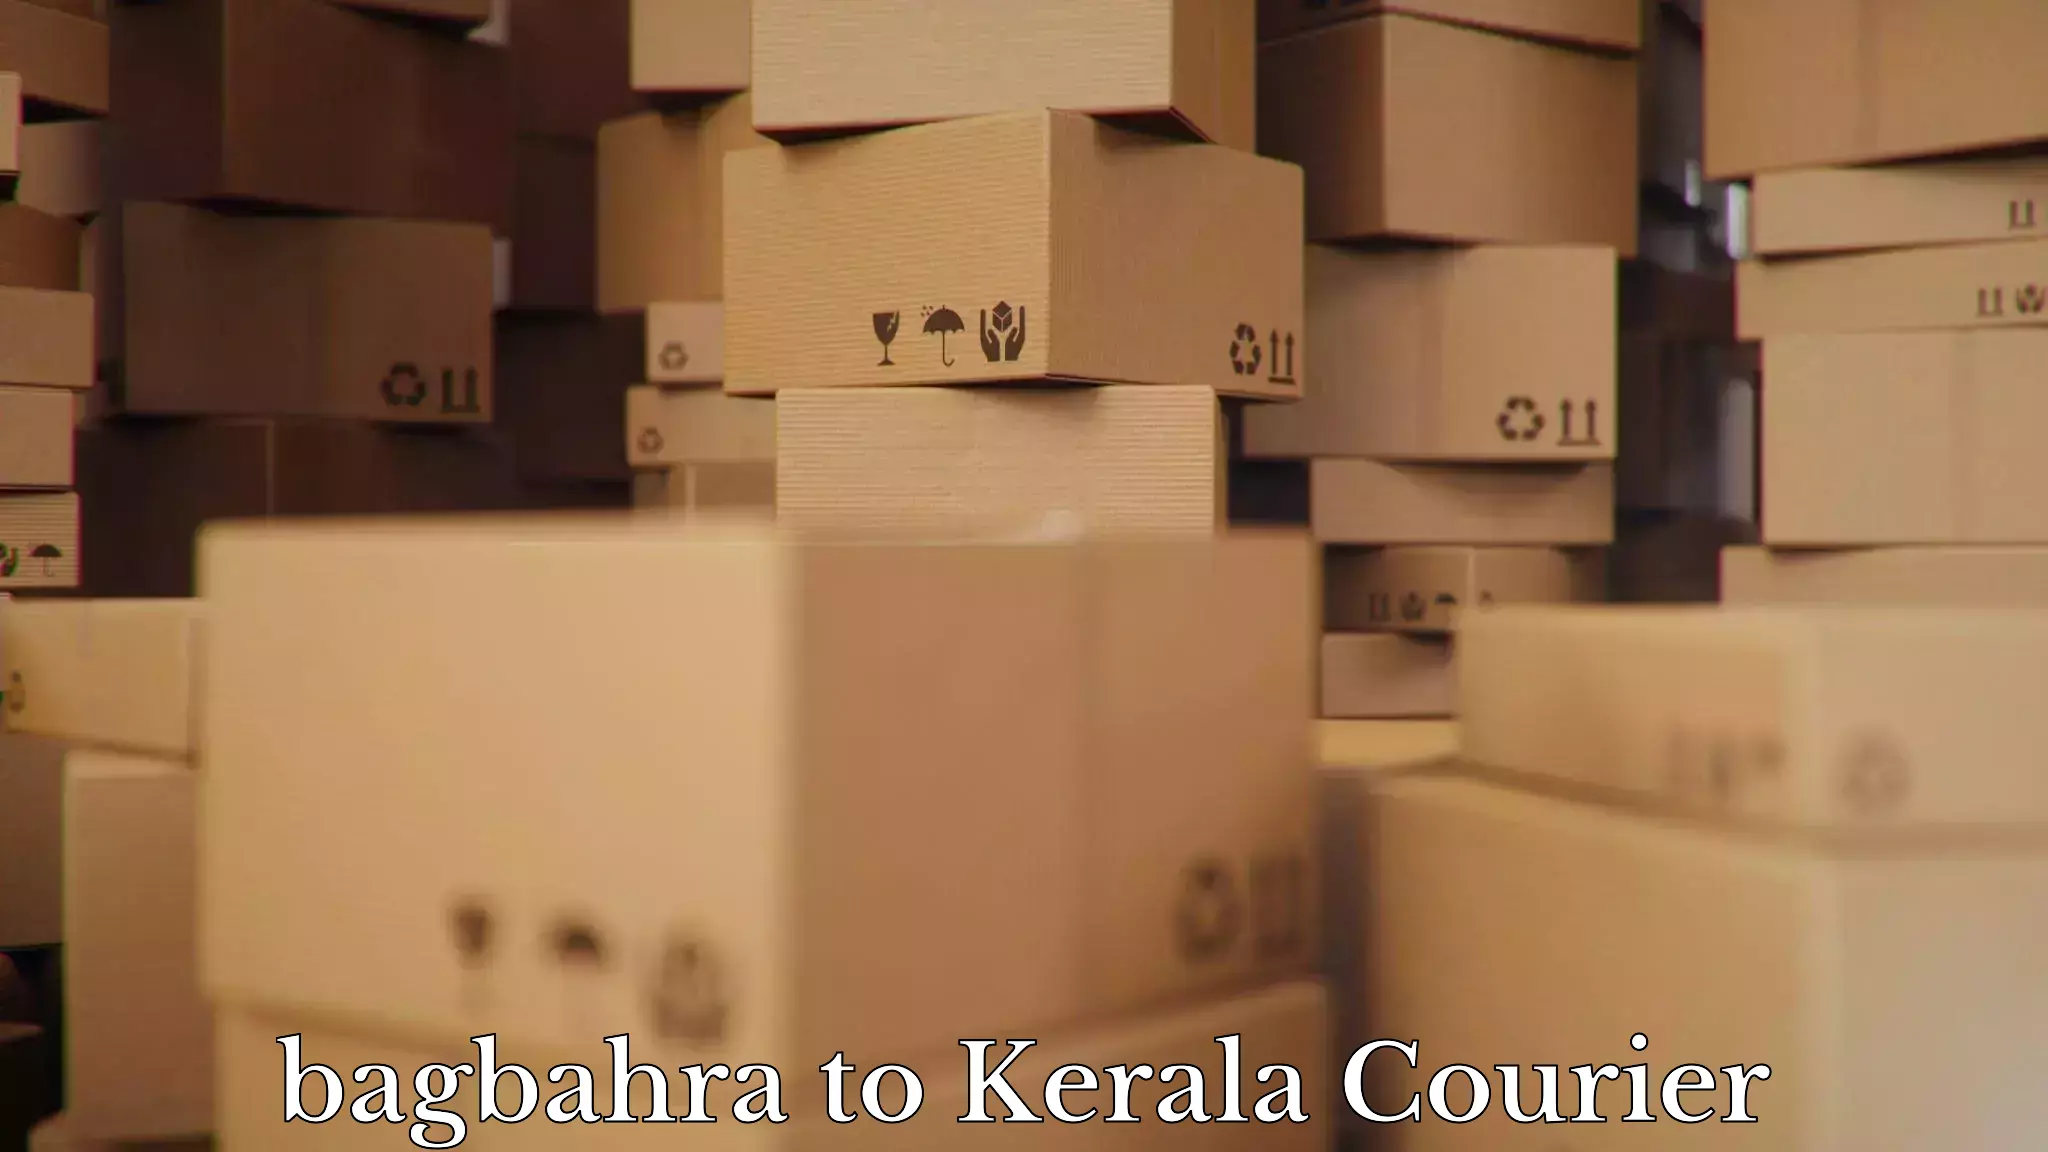 Dependable moving services bagbahra to Kerala